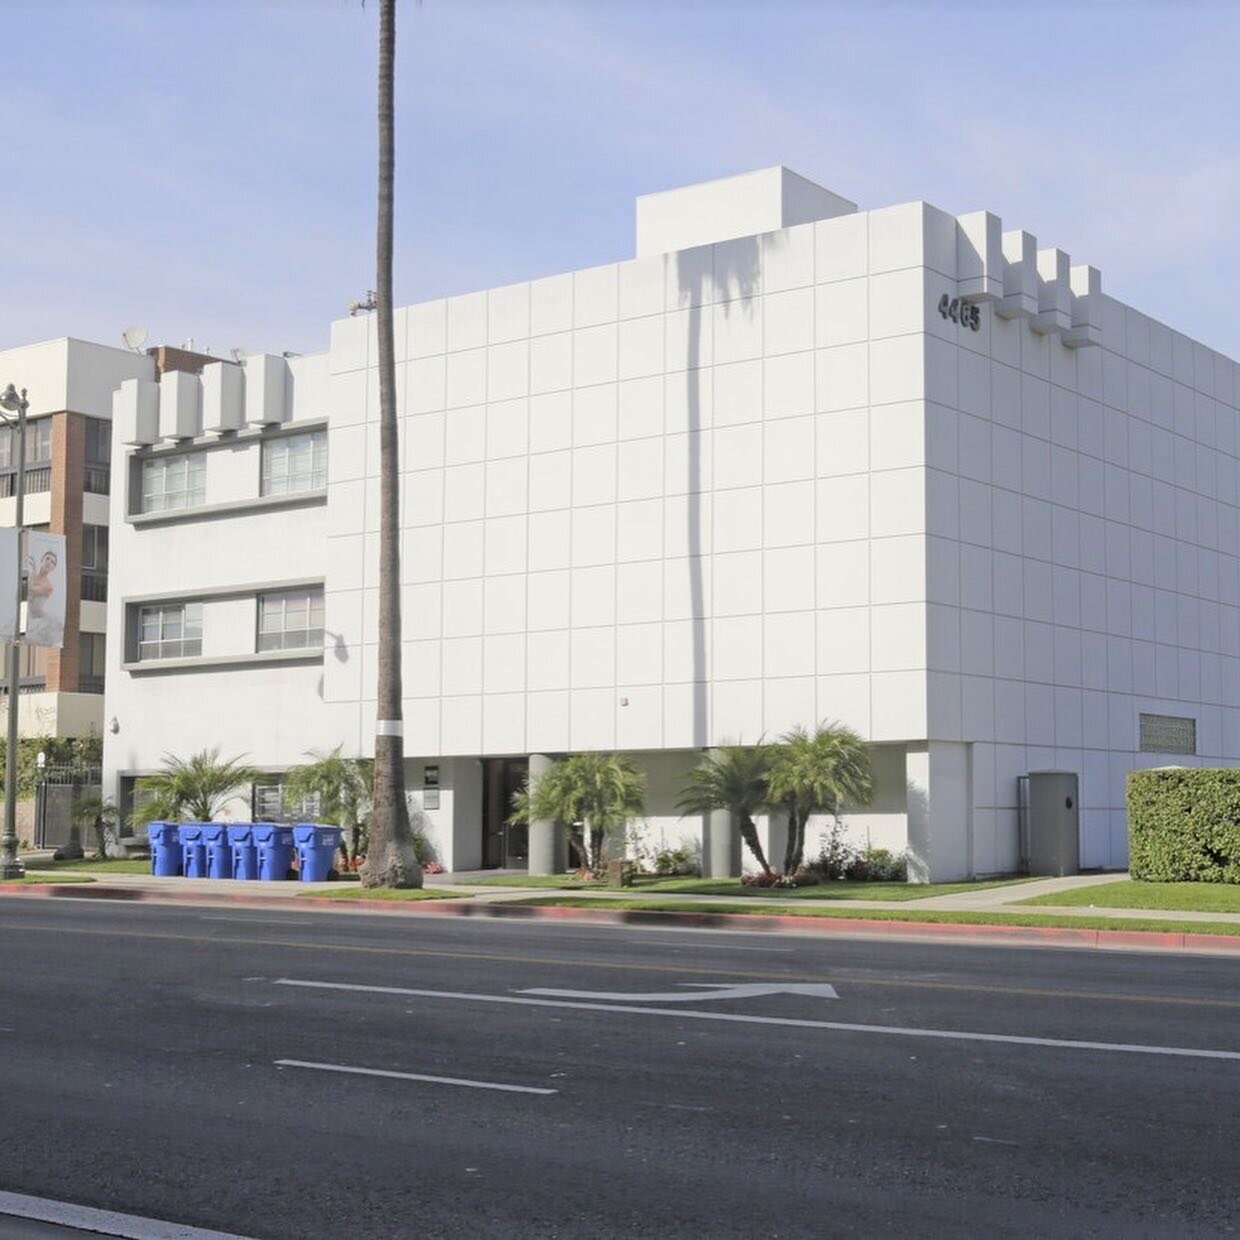 For Lease 🚩Fully Remolded 12,000sf Office Space on Wilshire Blvd.
Asking $2.95/sf MG. Plenty of Ground Parking Spaces. Great Location in Hancock Park near Koreatown ☎️213-703-6486

#officelease #laagent #topagent #commercialagent #commercialbroker